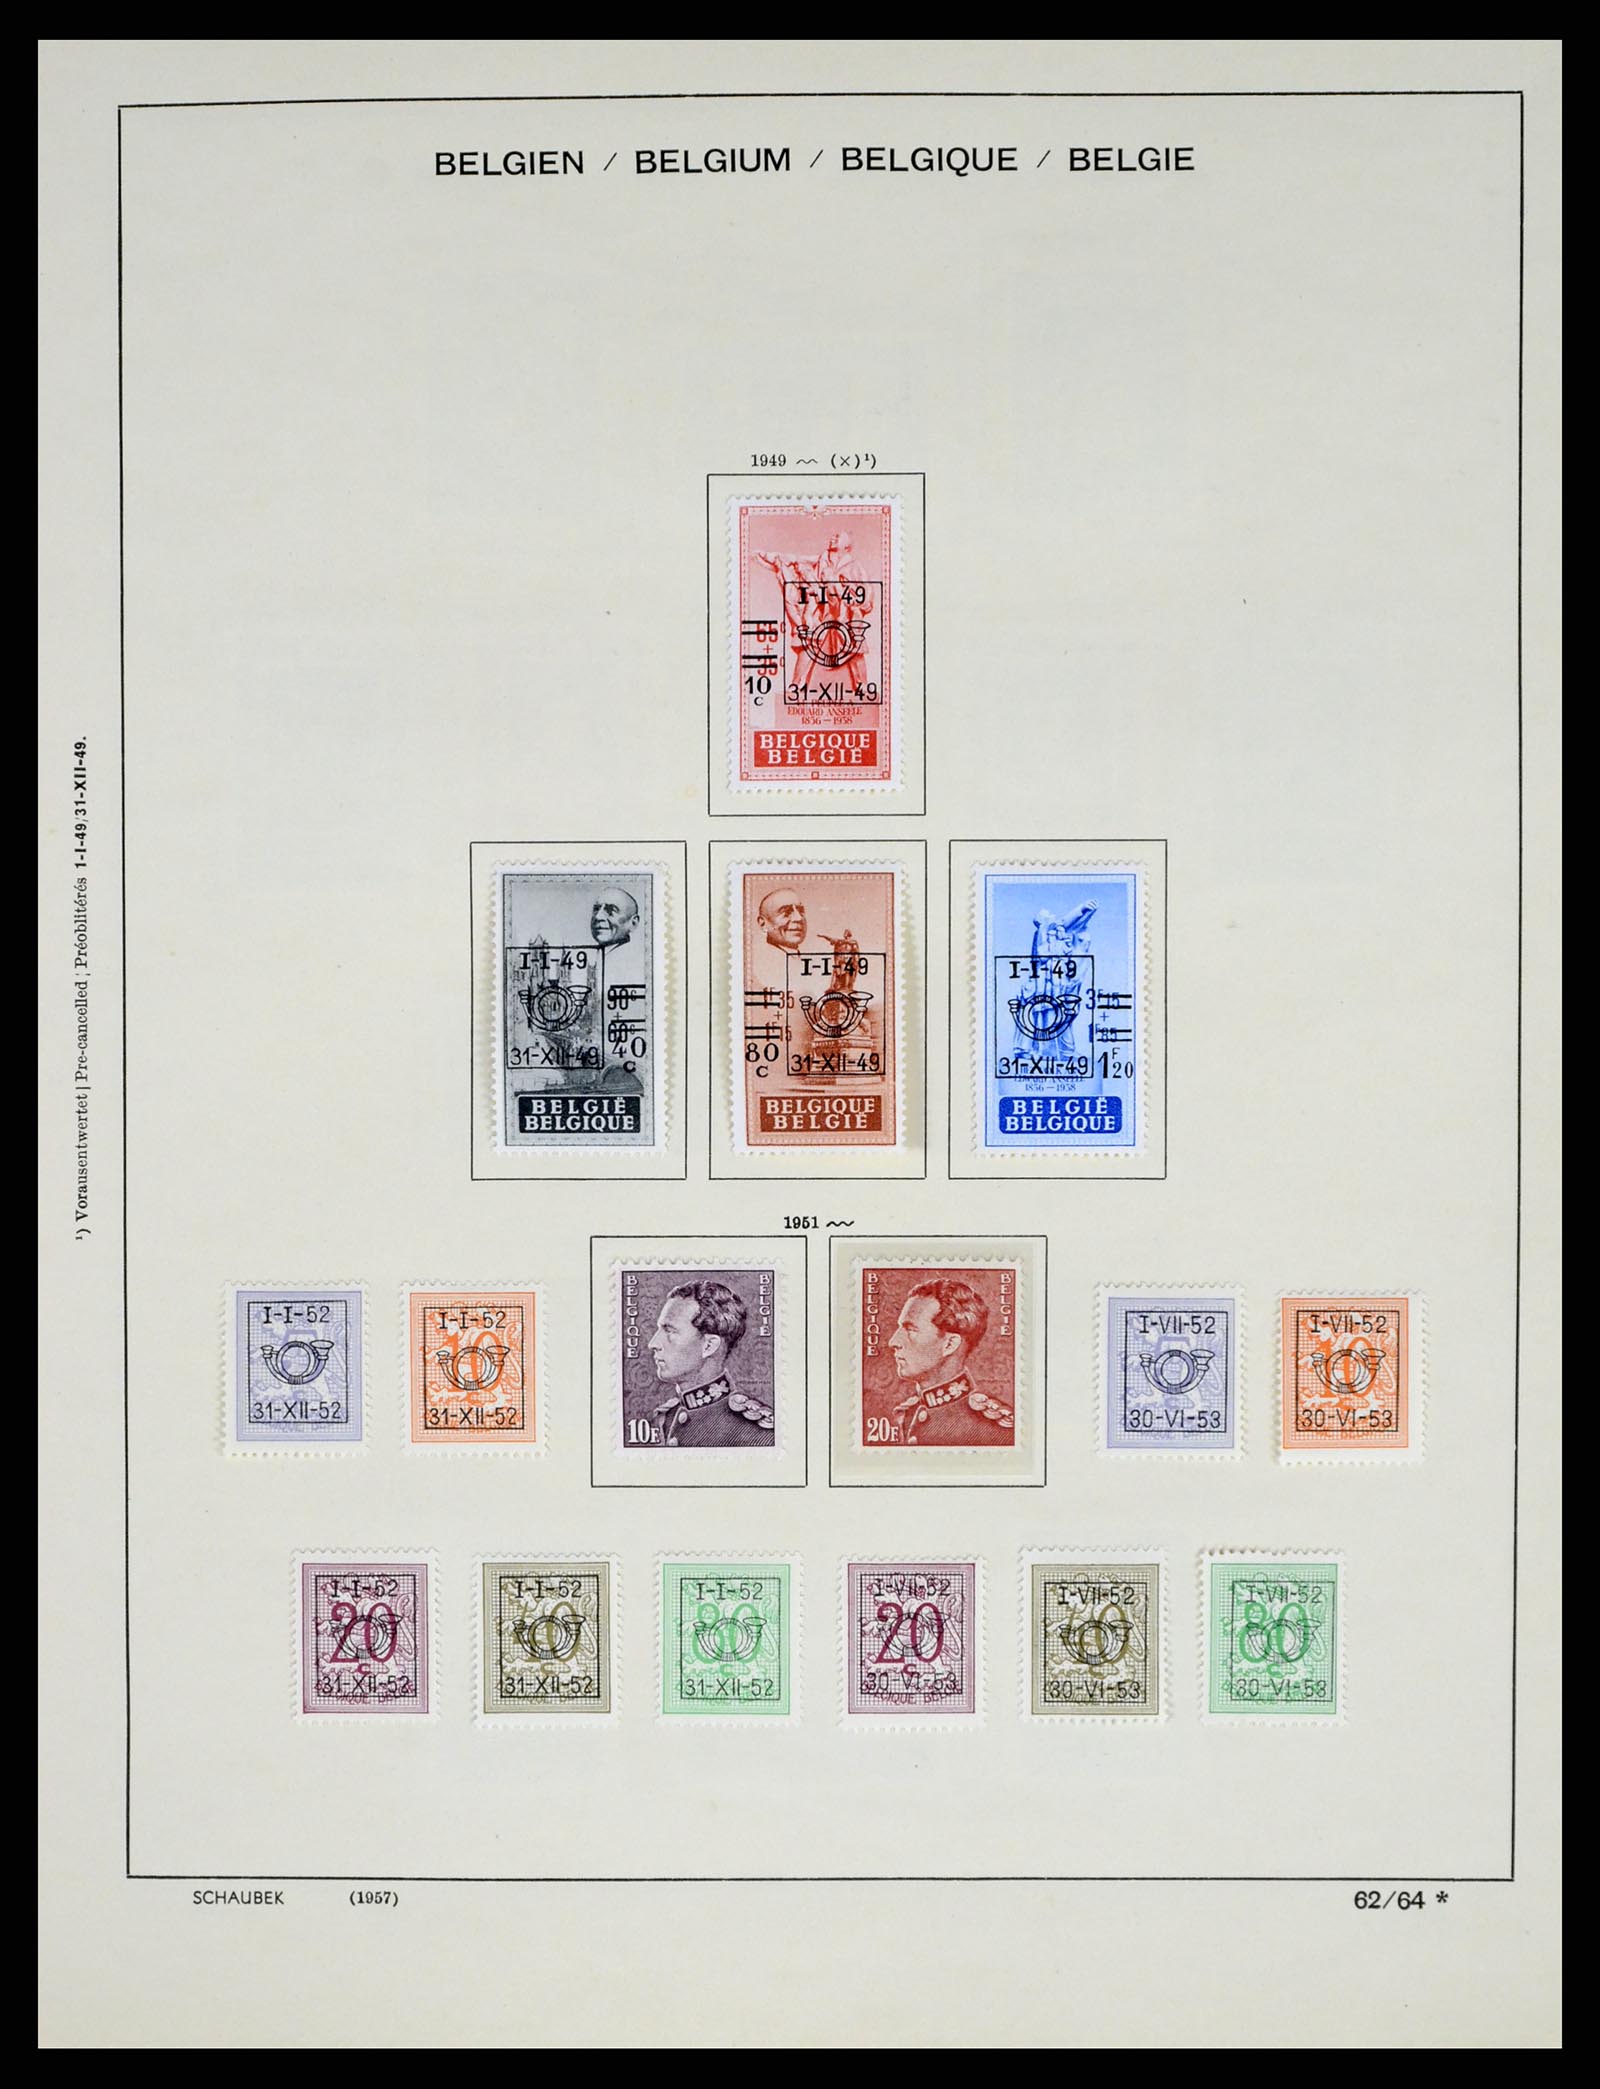 37595 076 - Stamp collection 37595 Super collection Belgium 1849-2015!